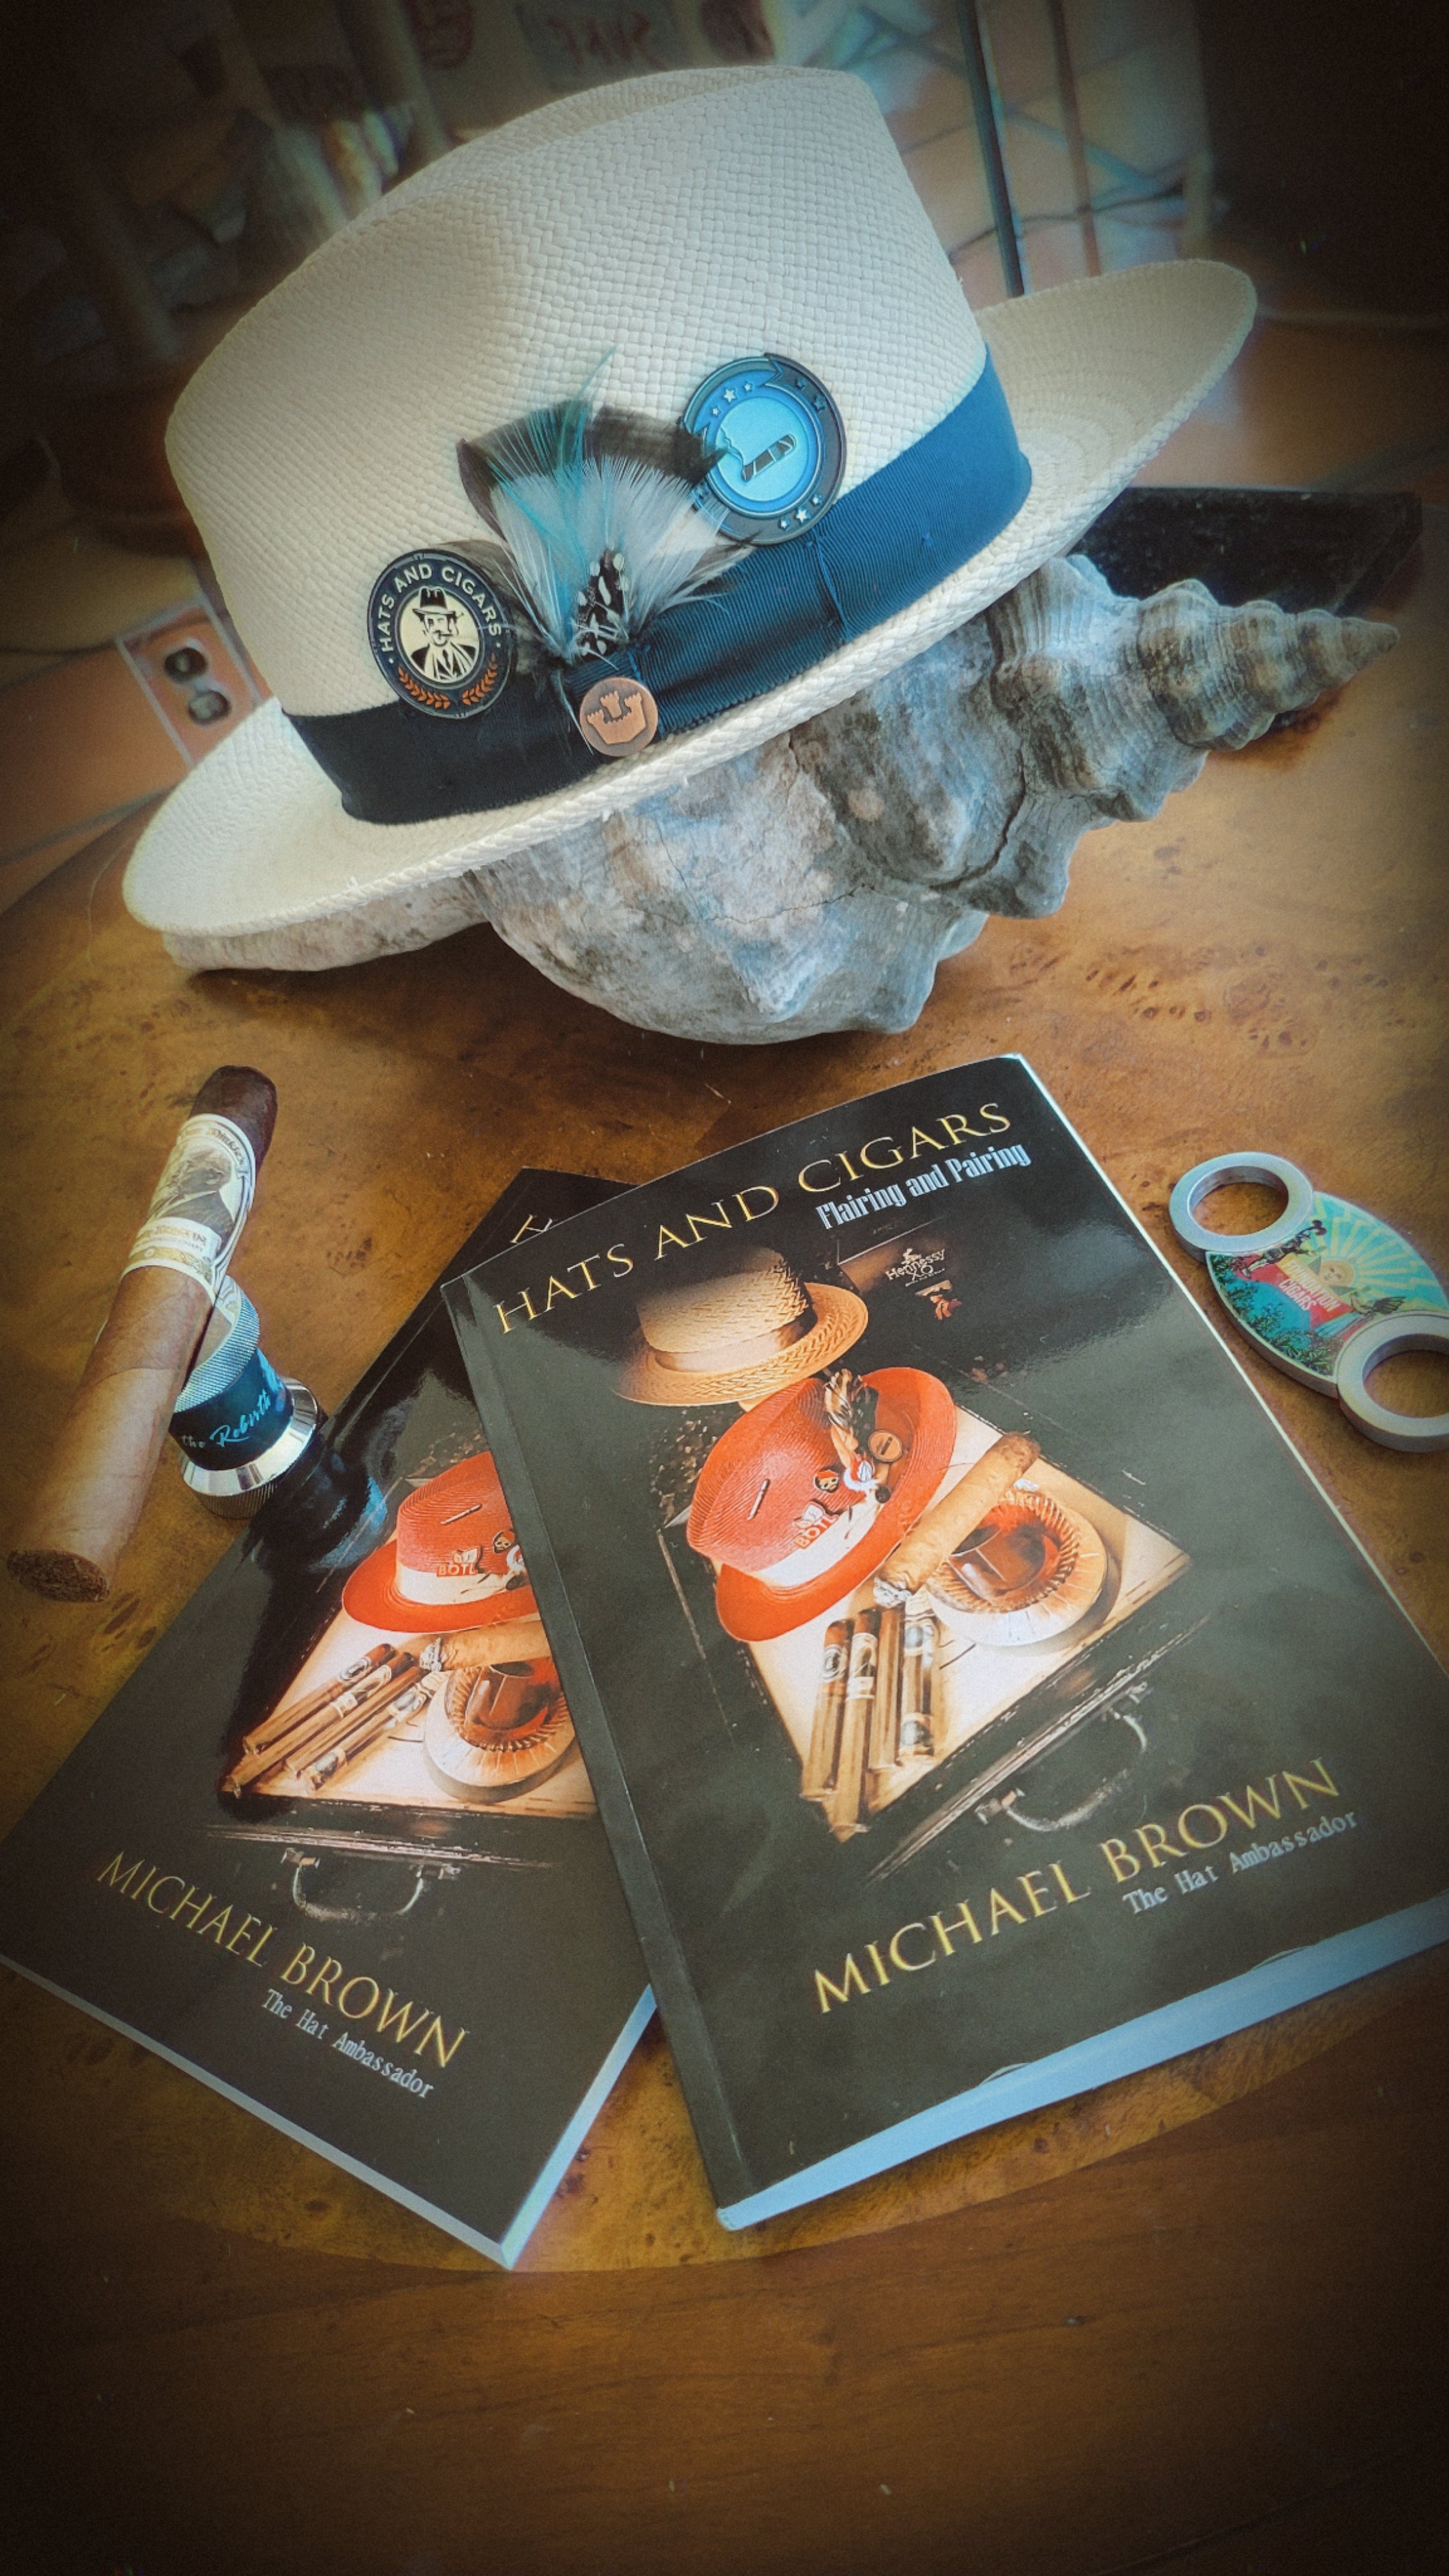 Hats and Cigars: Flairing and Pairing-Paperback